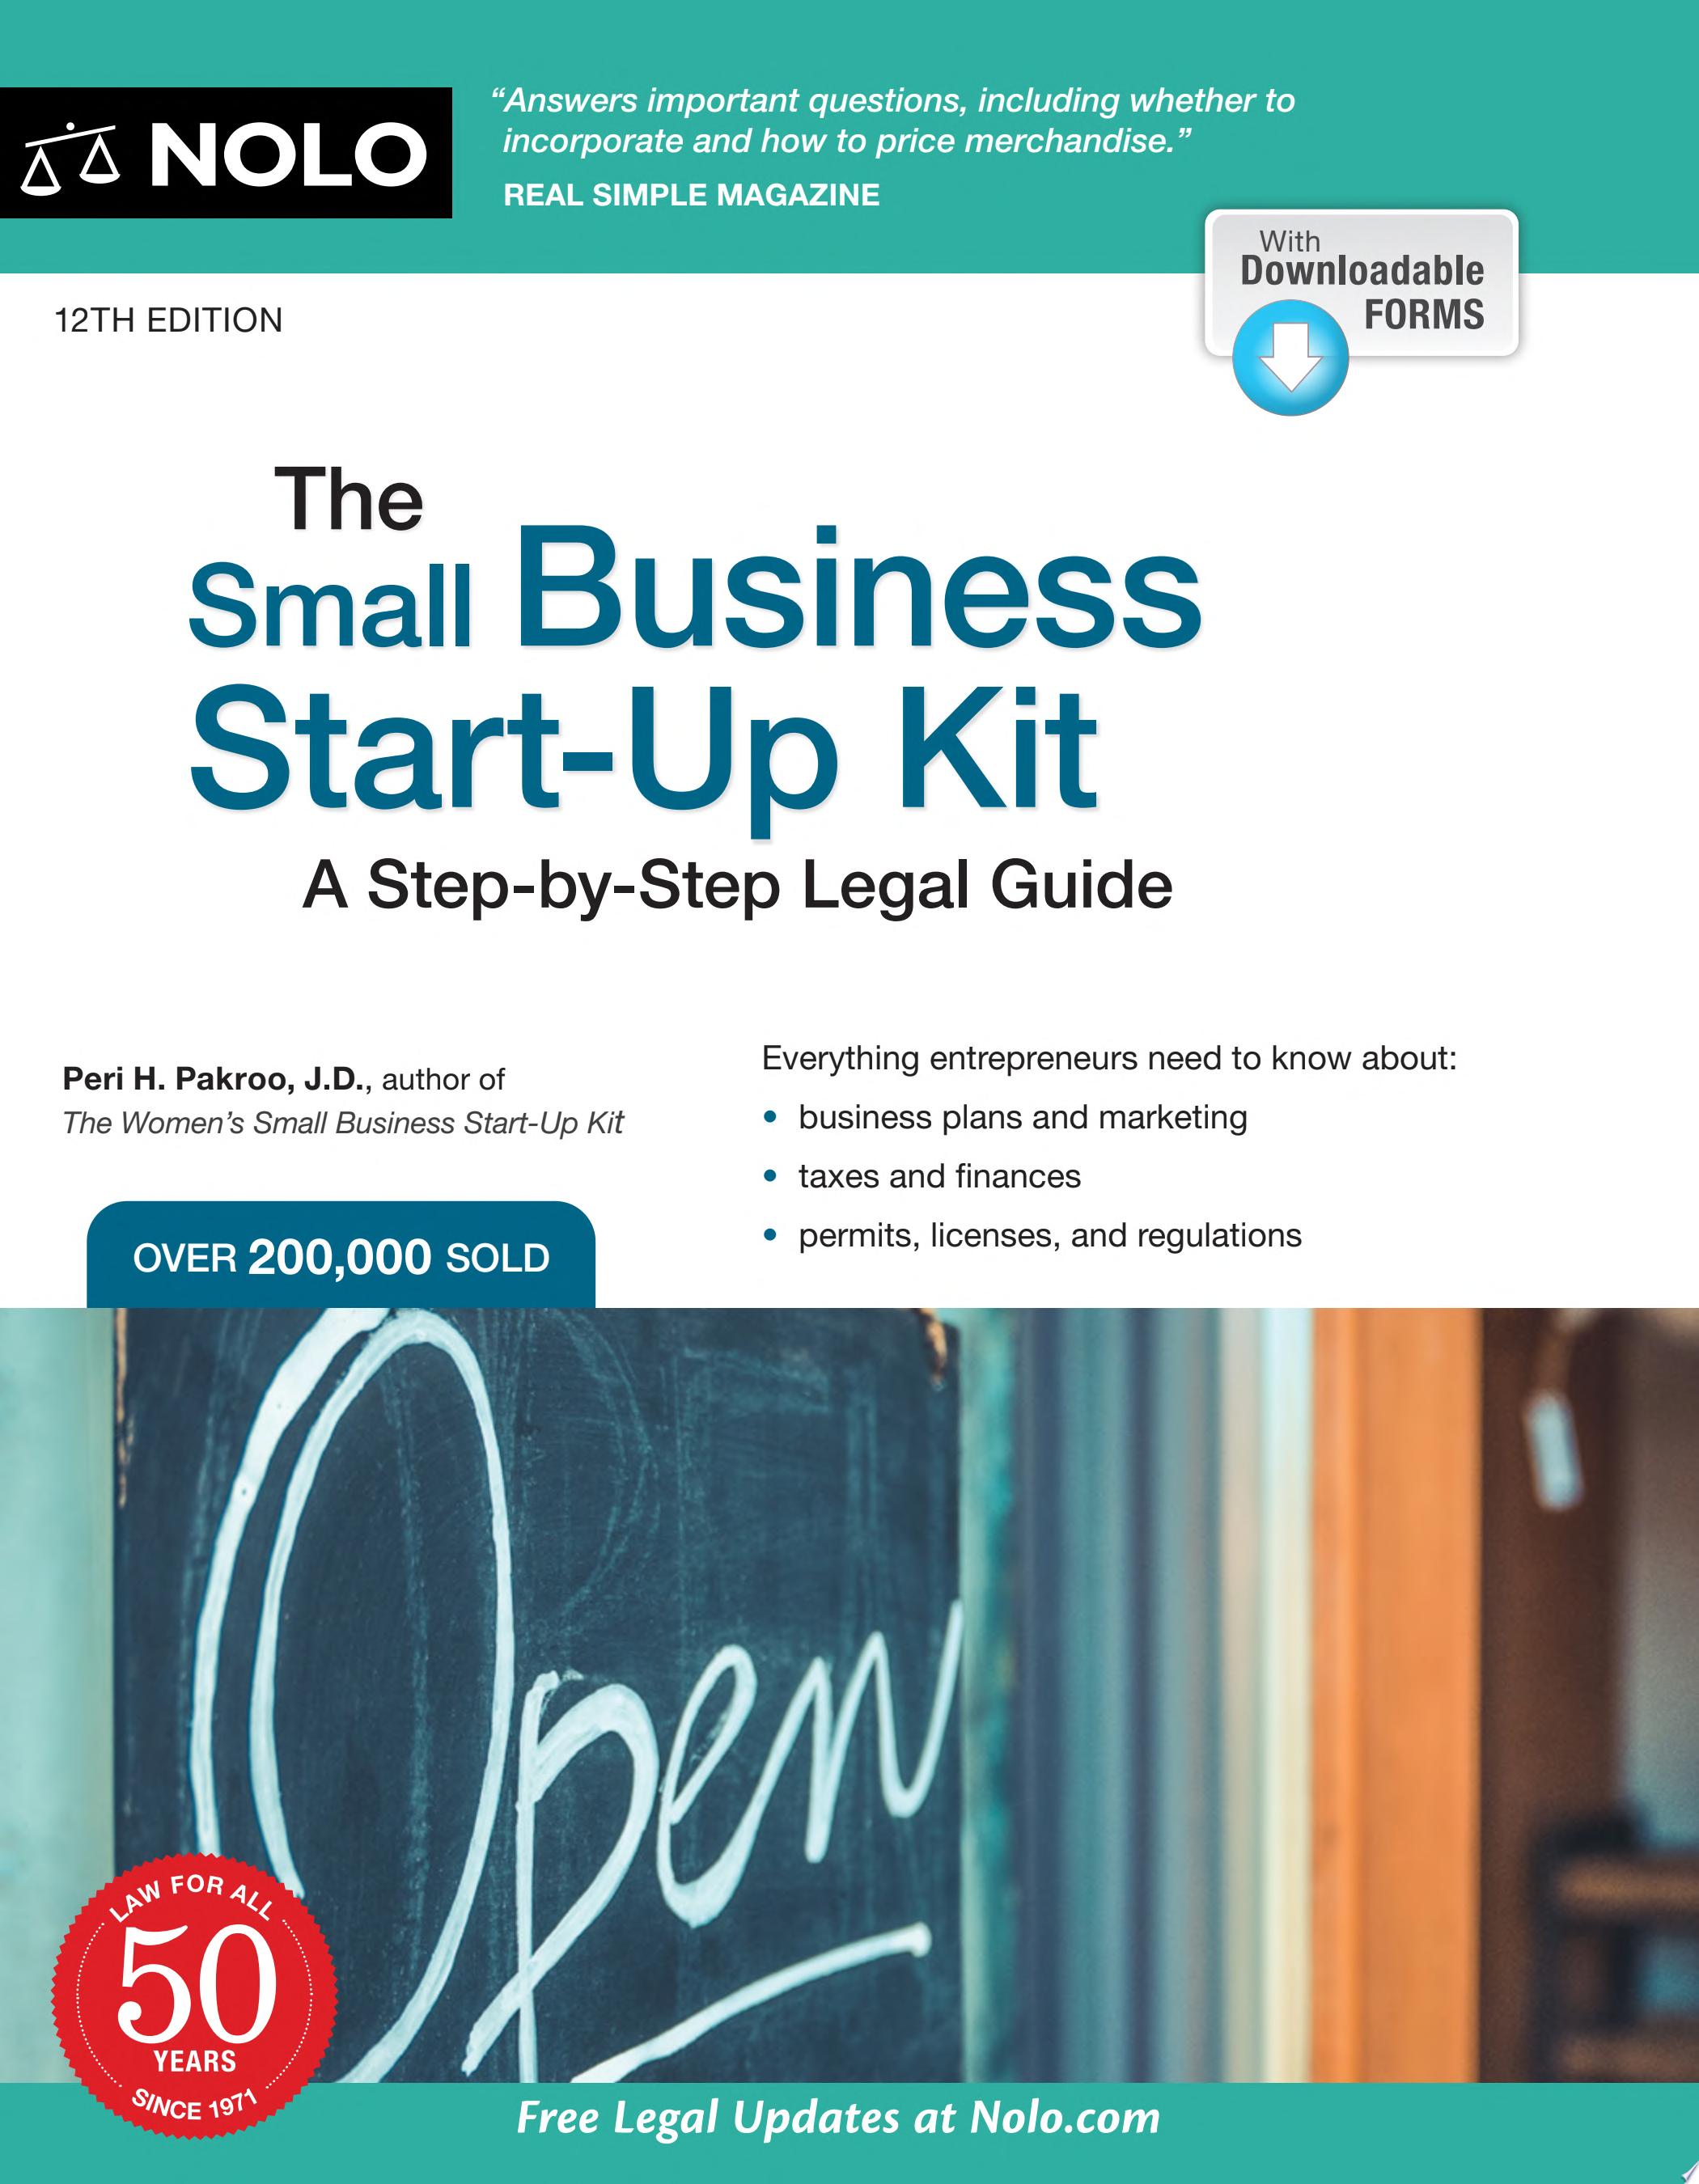 Image for "The Small Business Start-Up Kit"